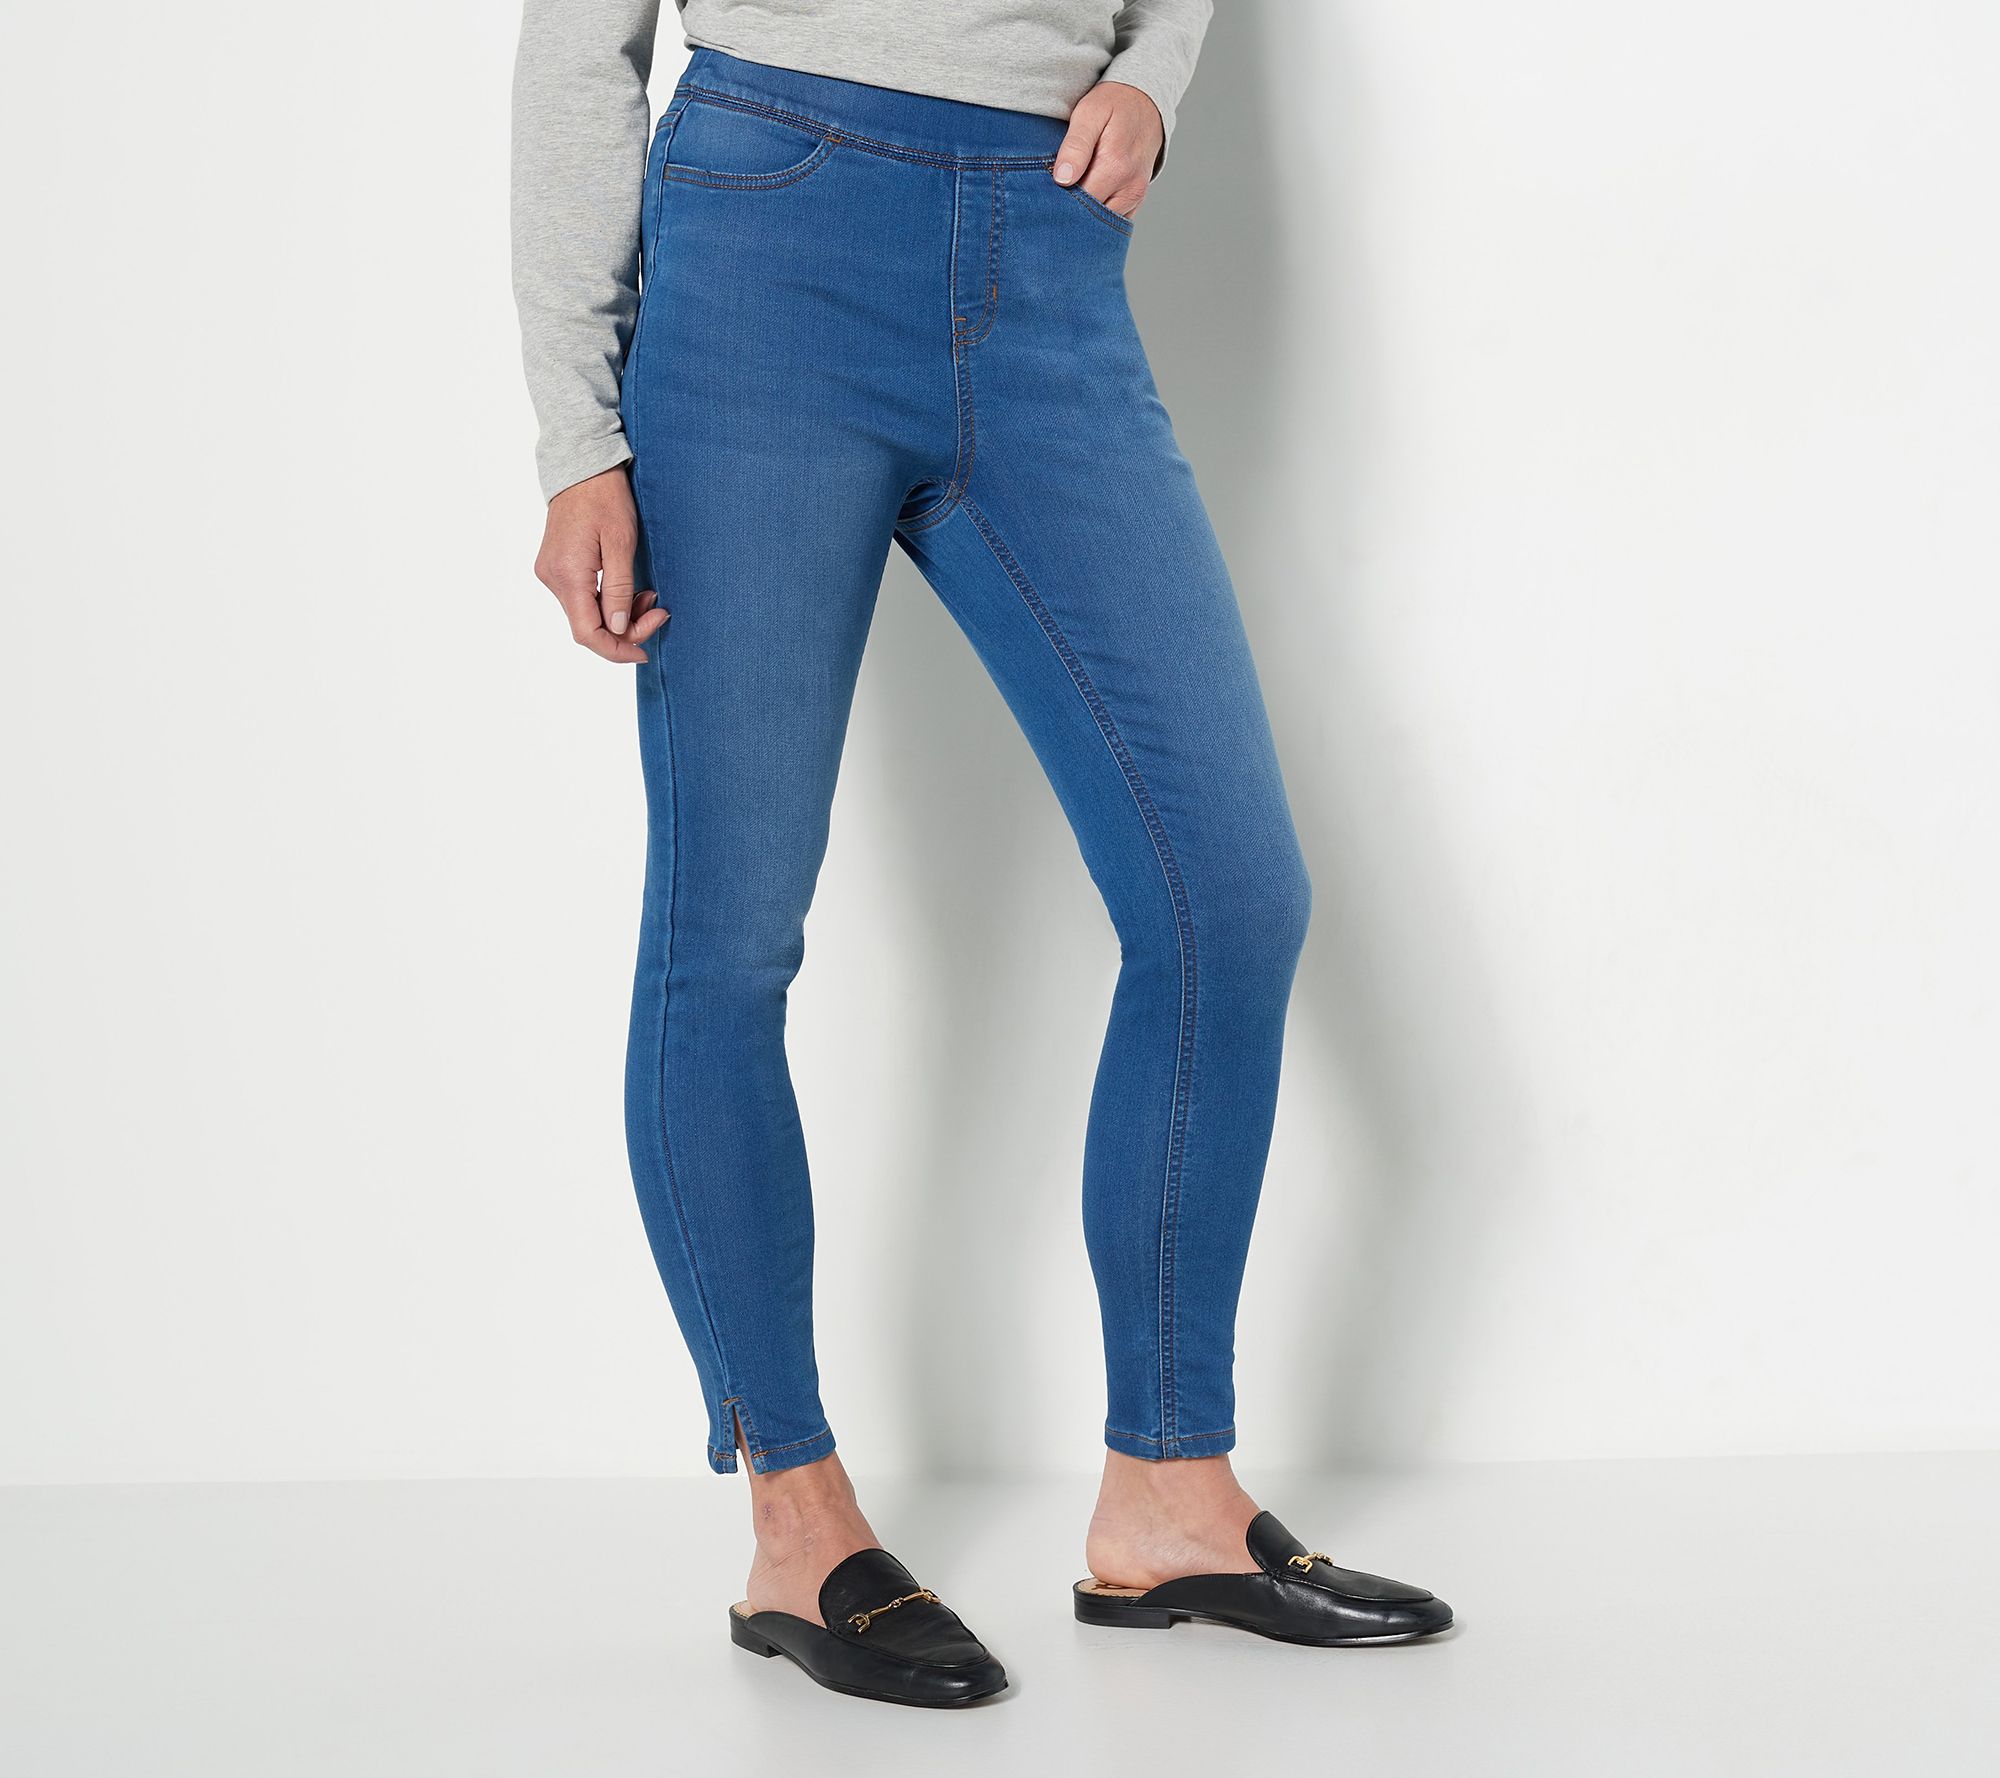 As Is Denim & Co. Comfy Knit Petite Jeggings with Side Slits 